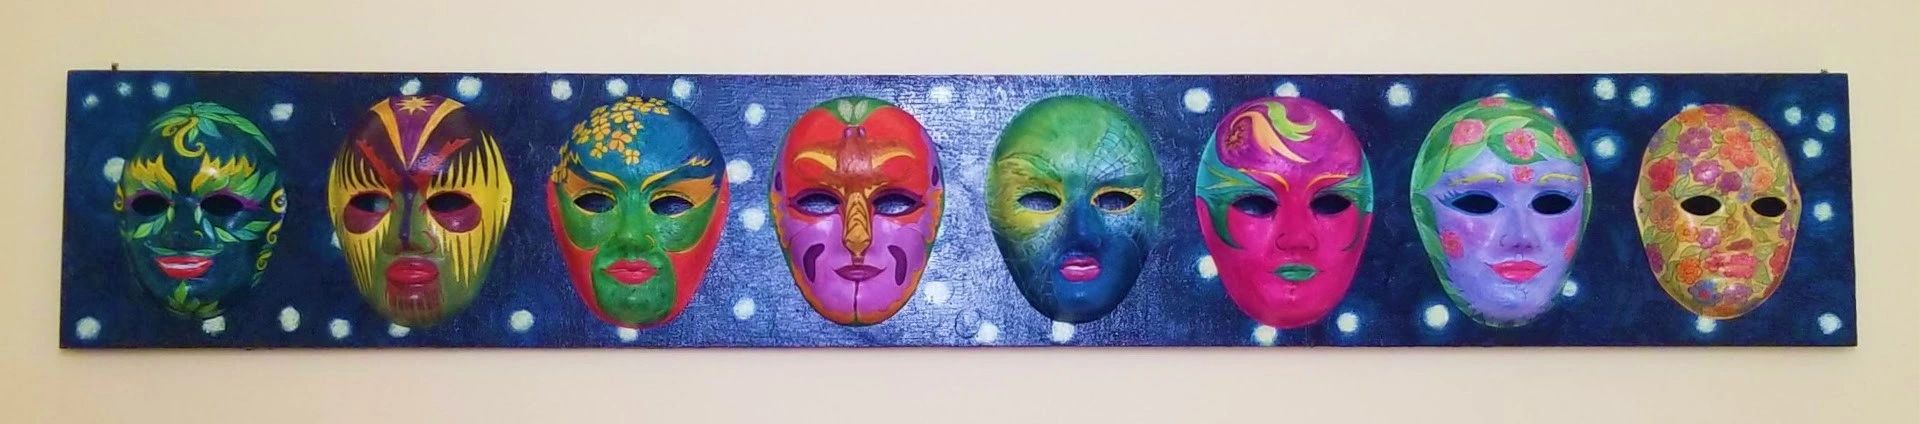 Masks painted, mounted and photographed by O.E. Fitzgerald 2021.